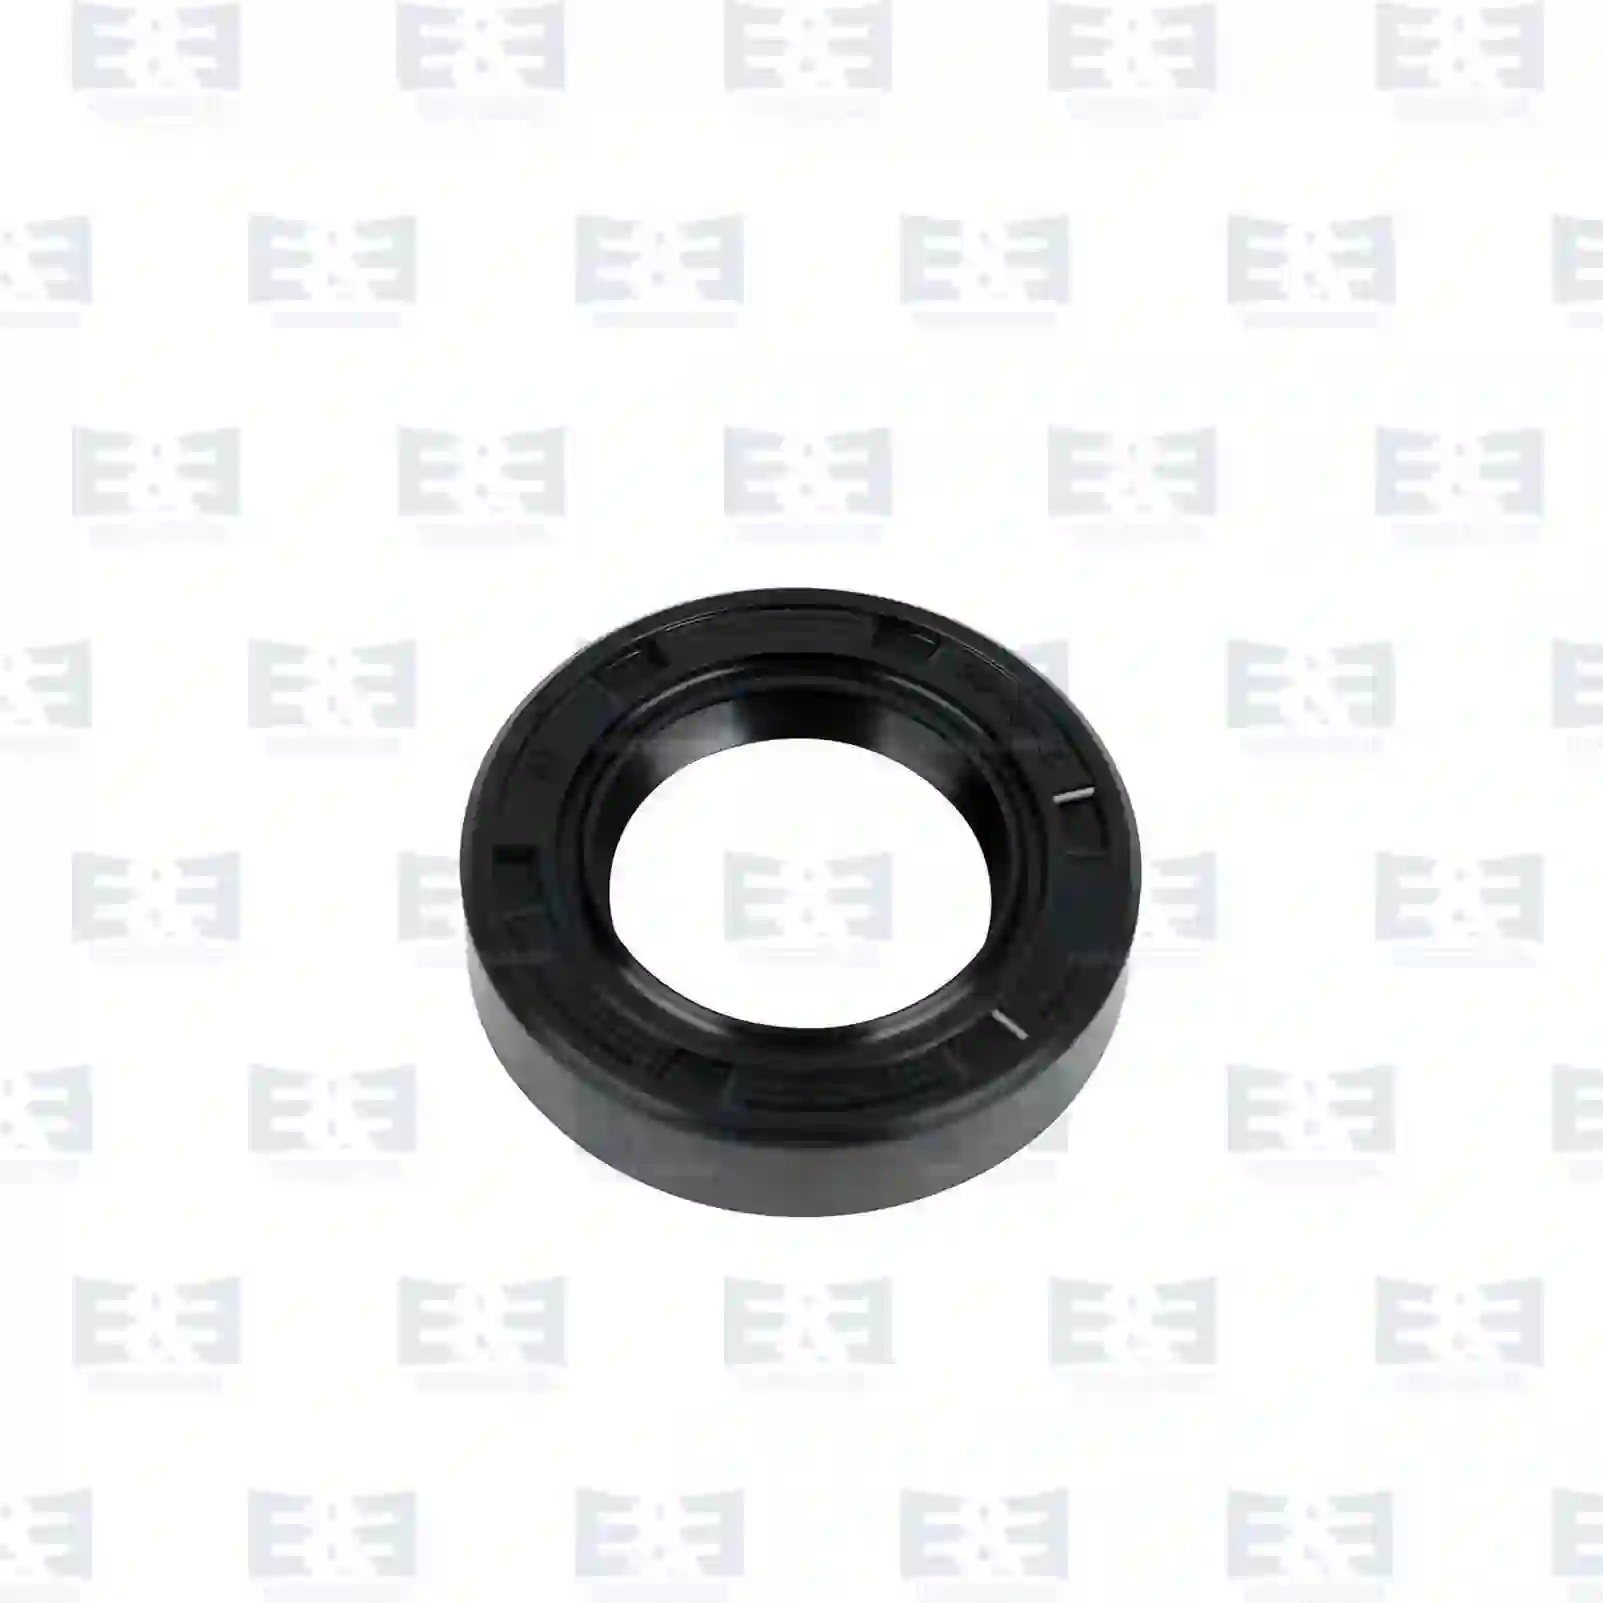 Steering Box Oil seal, EE No 2E2205785 ,  oem no:01117794, 01160650, 01160650, 01117794, 01160650, 0029971946, 0029974346, 3449977146 E&E Truck Spare Parts | Truck Spare Parts, Auotomotive Spare Parts